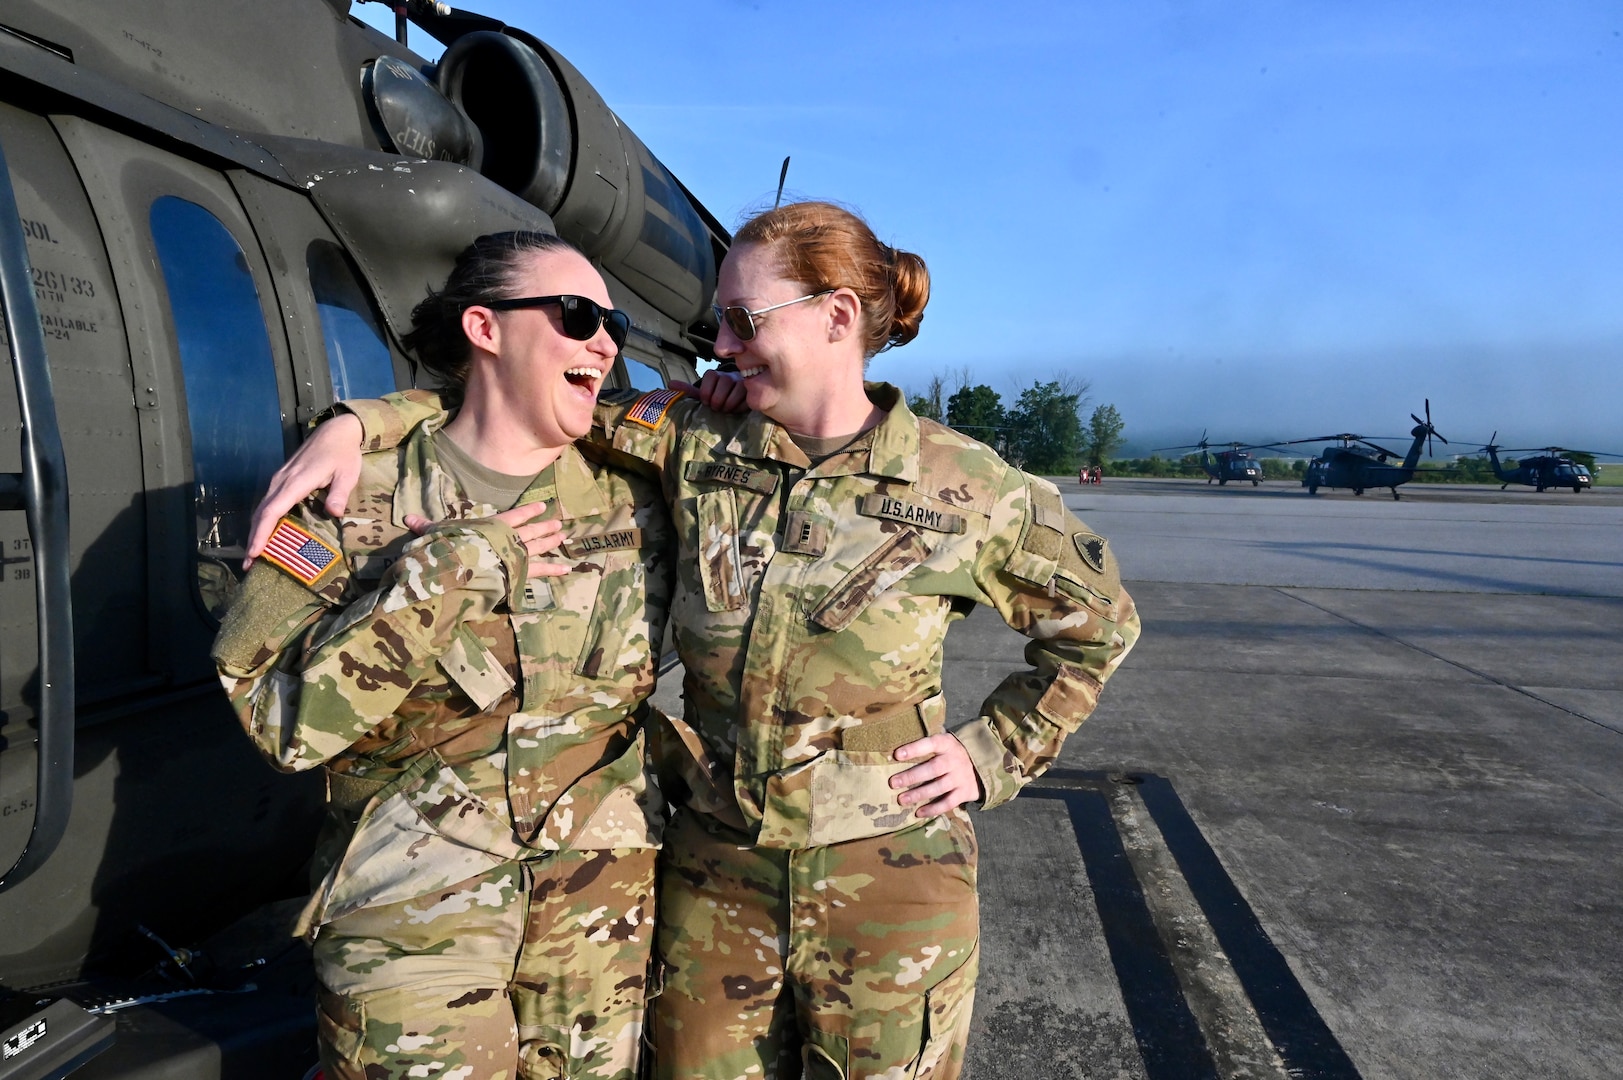 CW2 Lauren Bloch and CW3 Joy Byrnes, UH-60 Black Hawk pilots, District of Columbia National Guard, stand for a photograph at Davison Army Airfield, May 21, 2024. D.C. Army National Guard Aviation organized an all-female flight crew to commemorate the first woman to graduate Army flight school and the first female officer to achieve pilot status in June 1974.